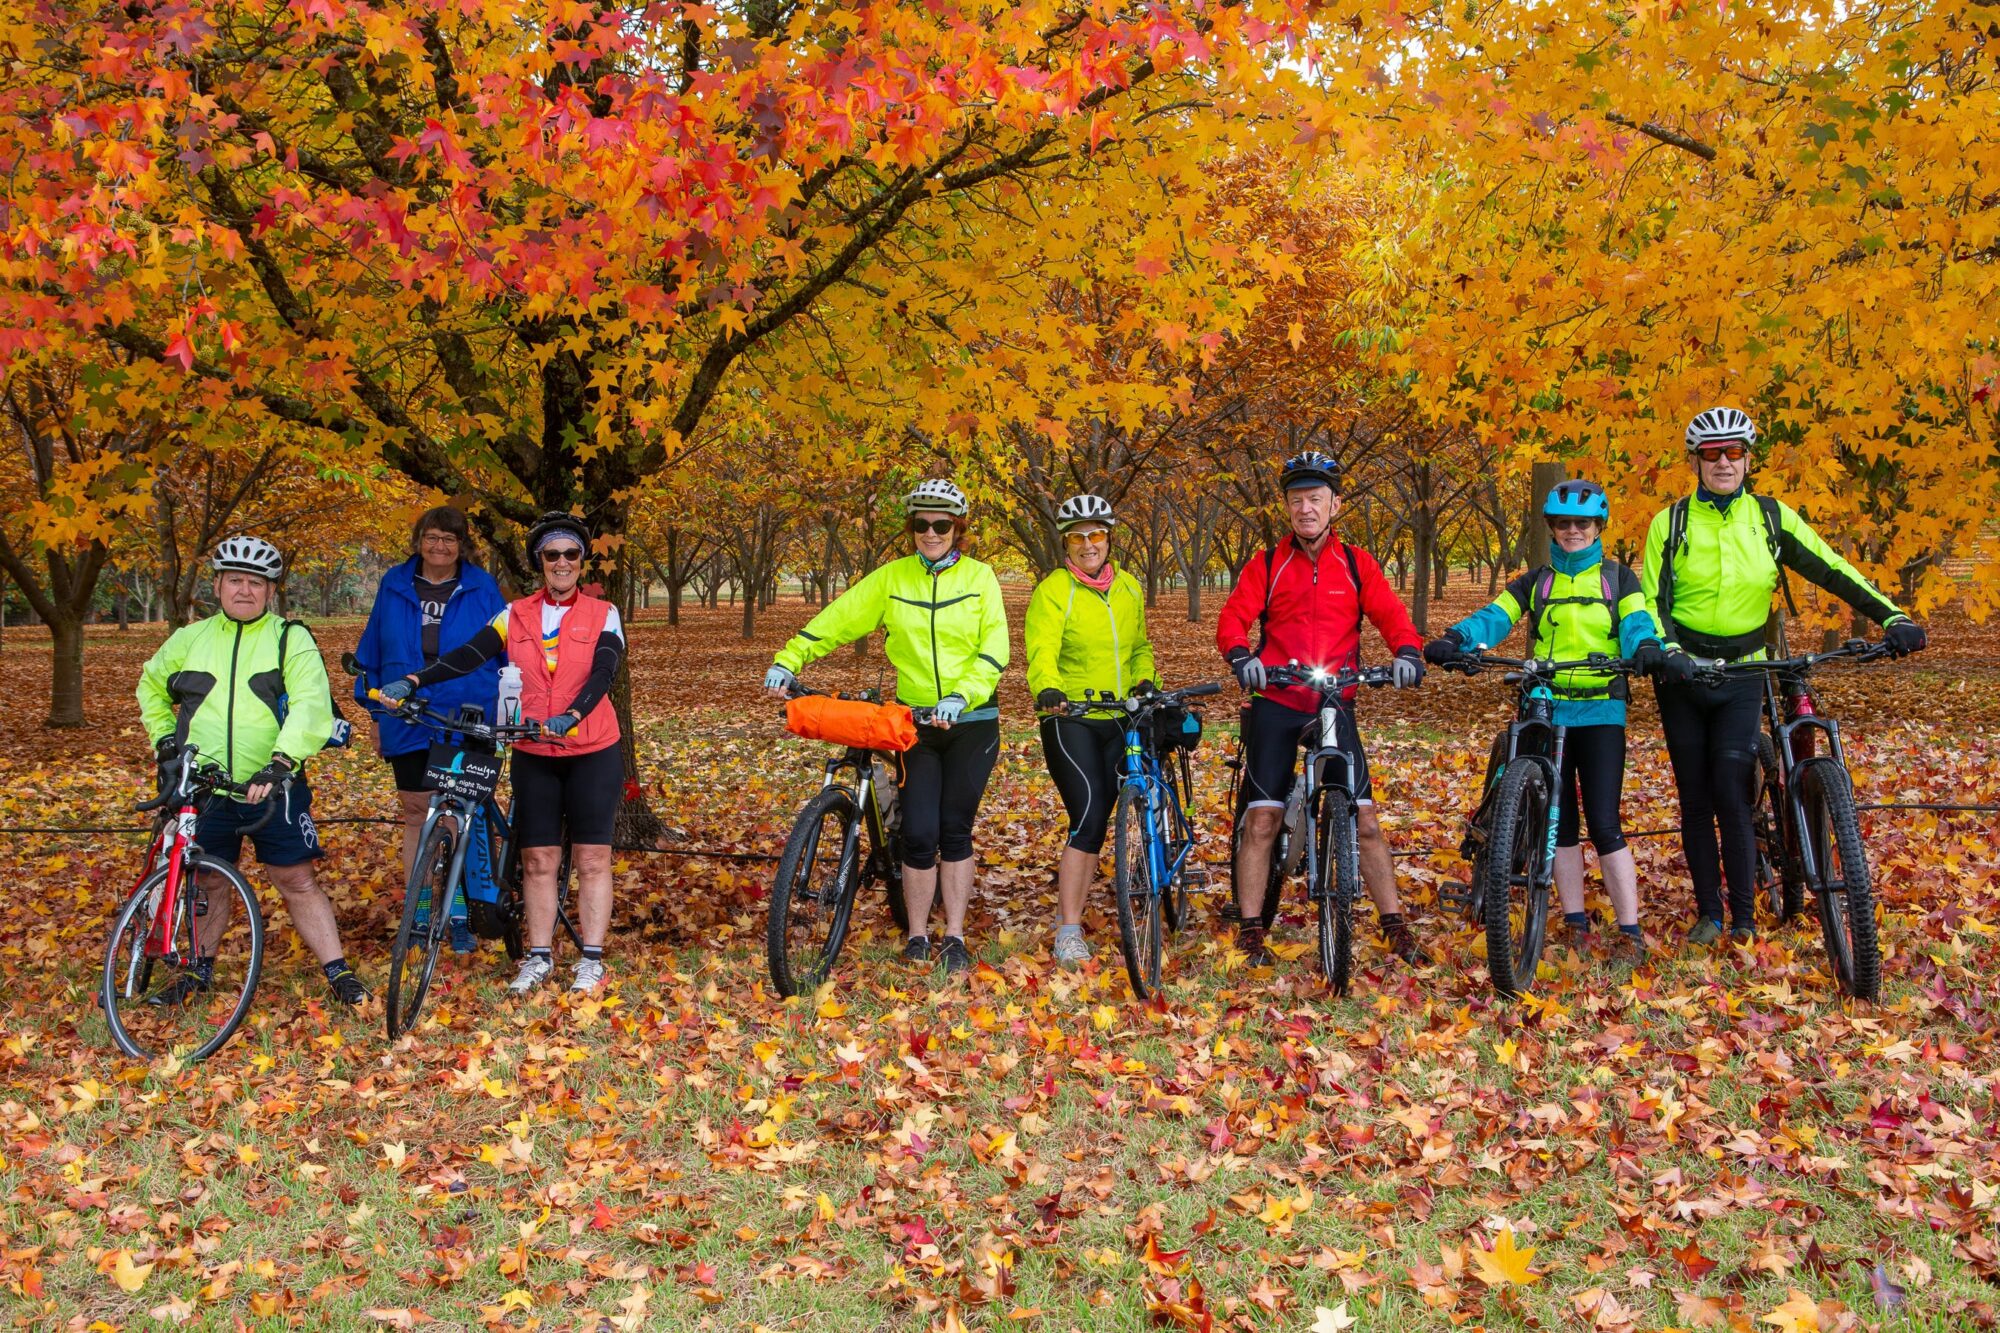 Cyclists and their bikes in front of an orchard  with brilliant yellow and orange leaves